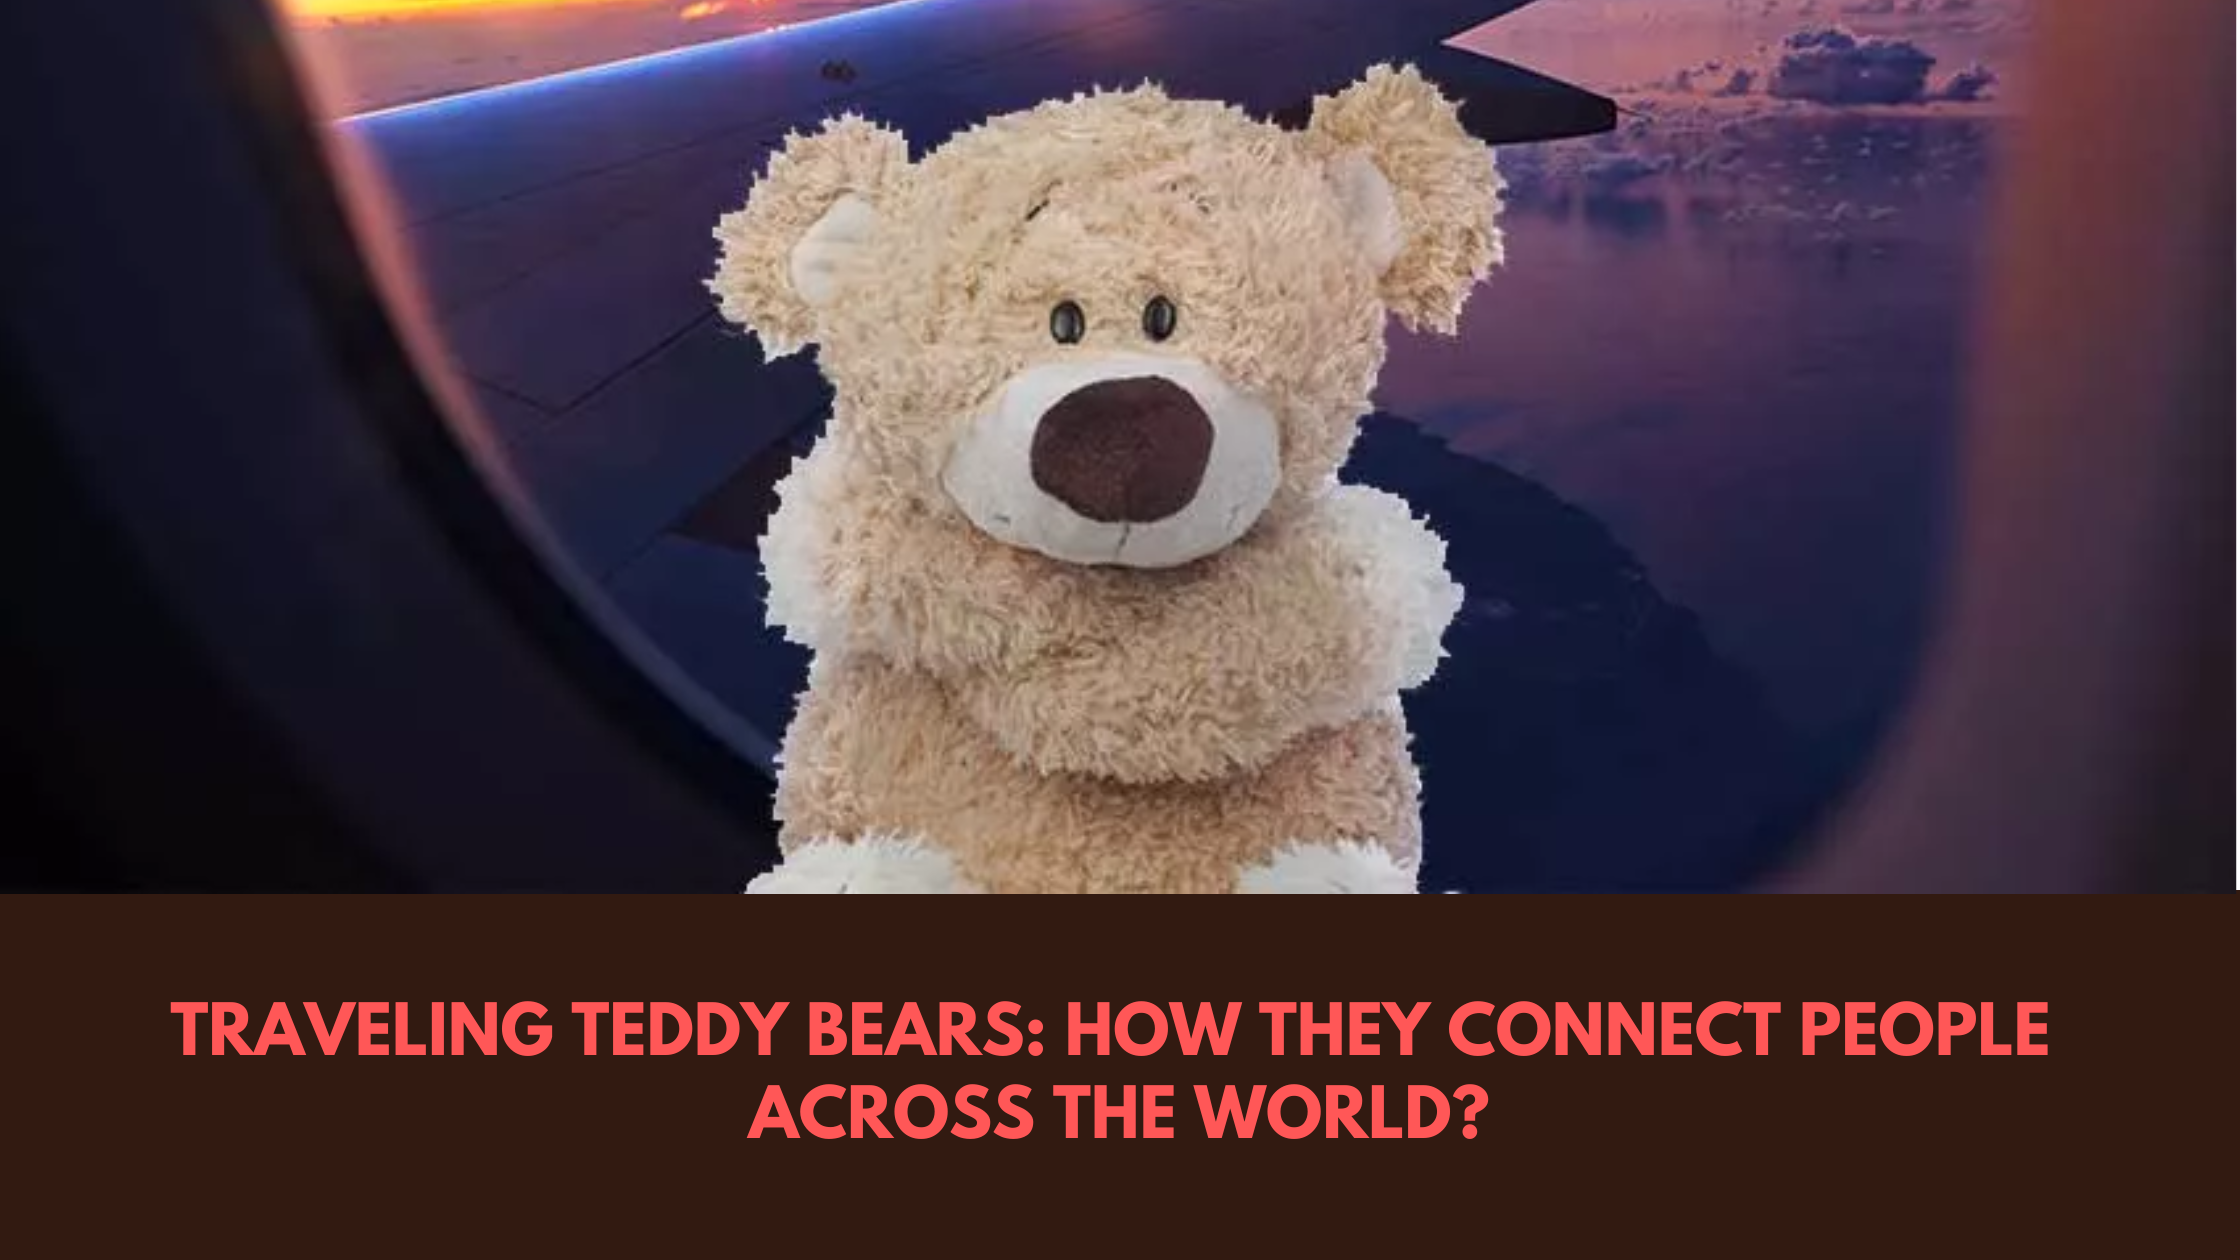 Traveling Teddy Bears: How They Connect People Across the World?